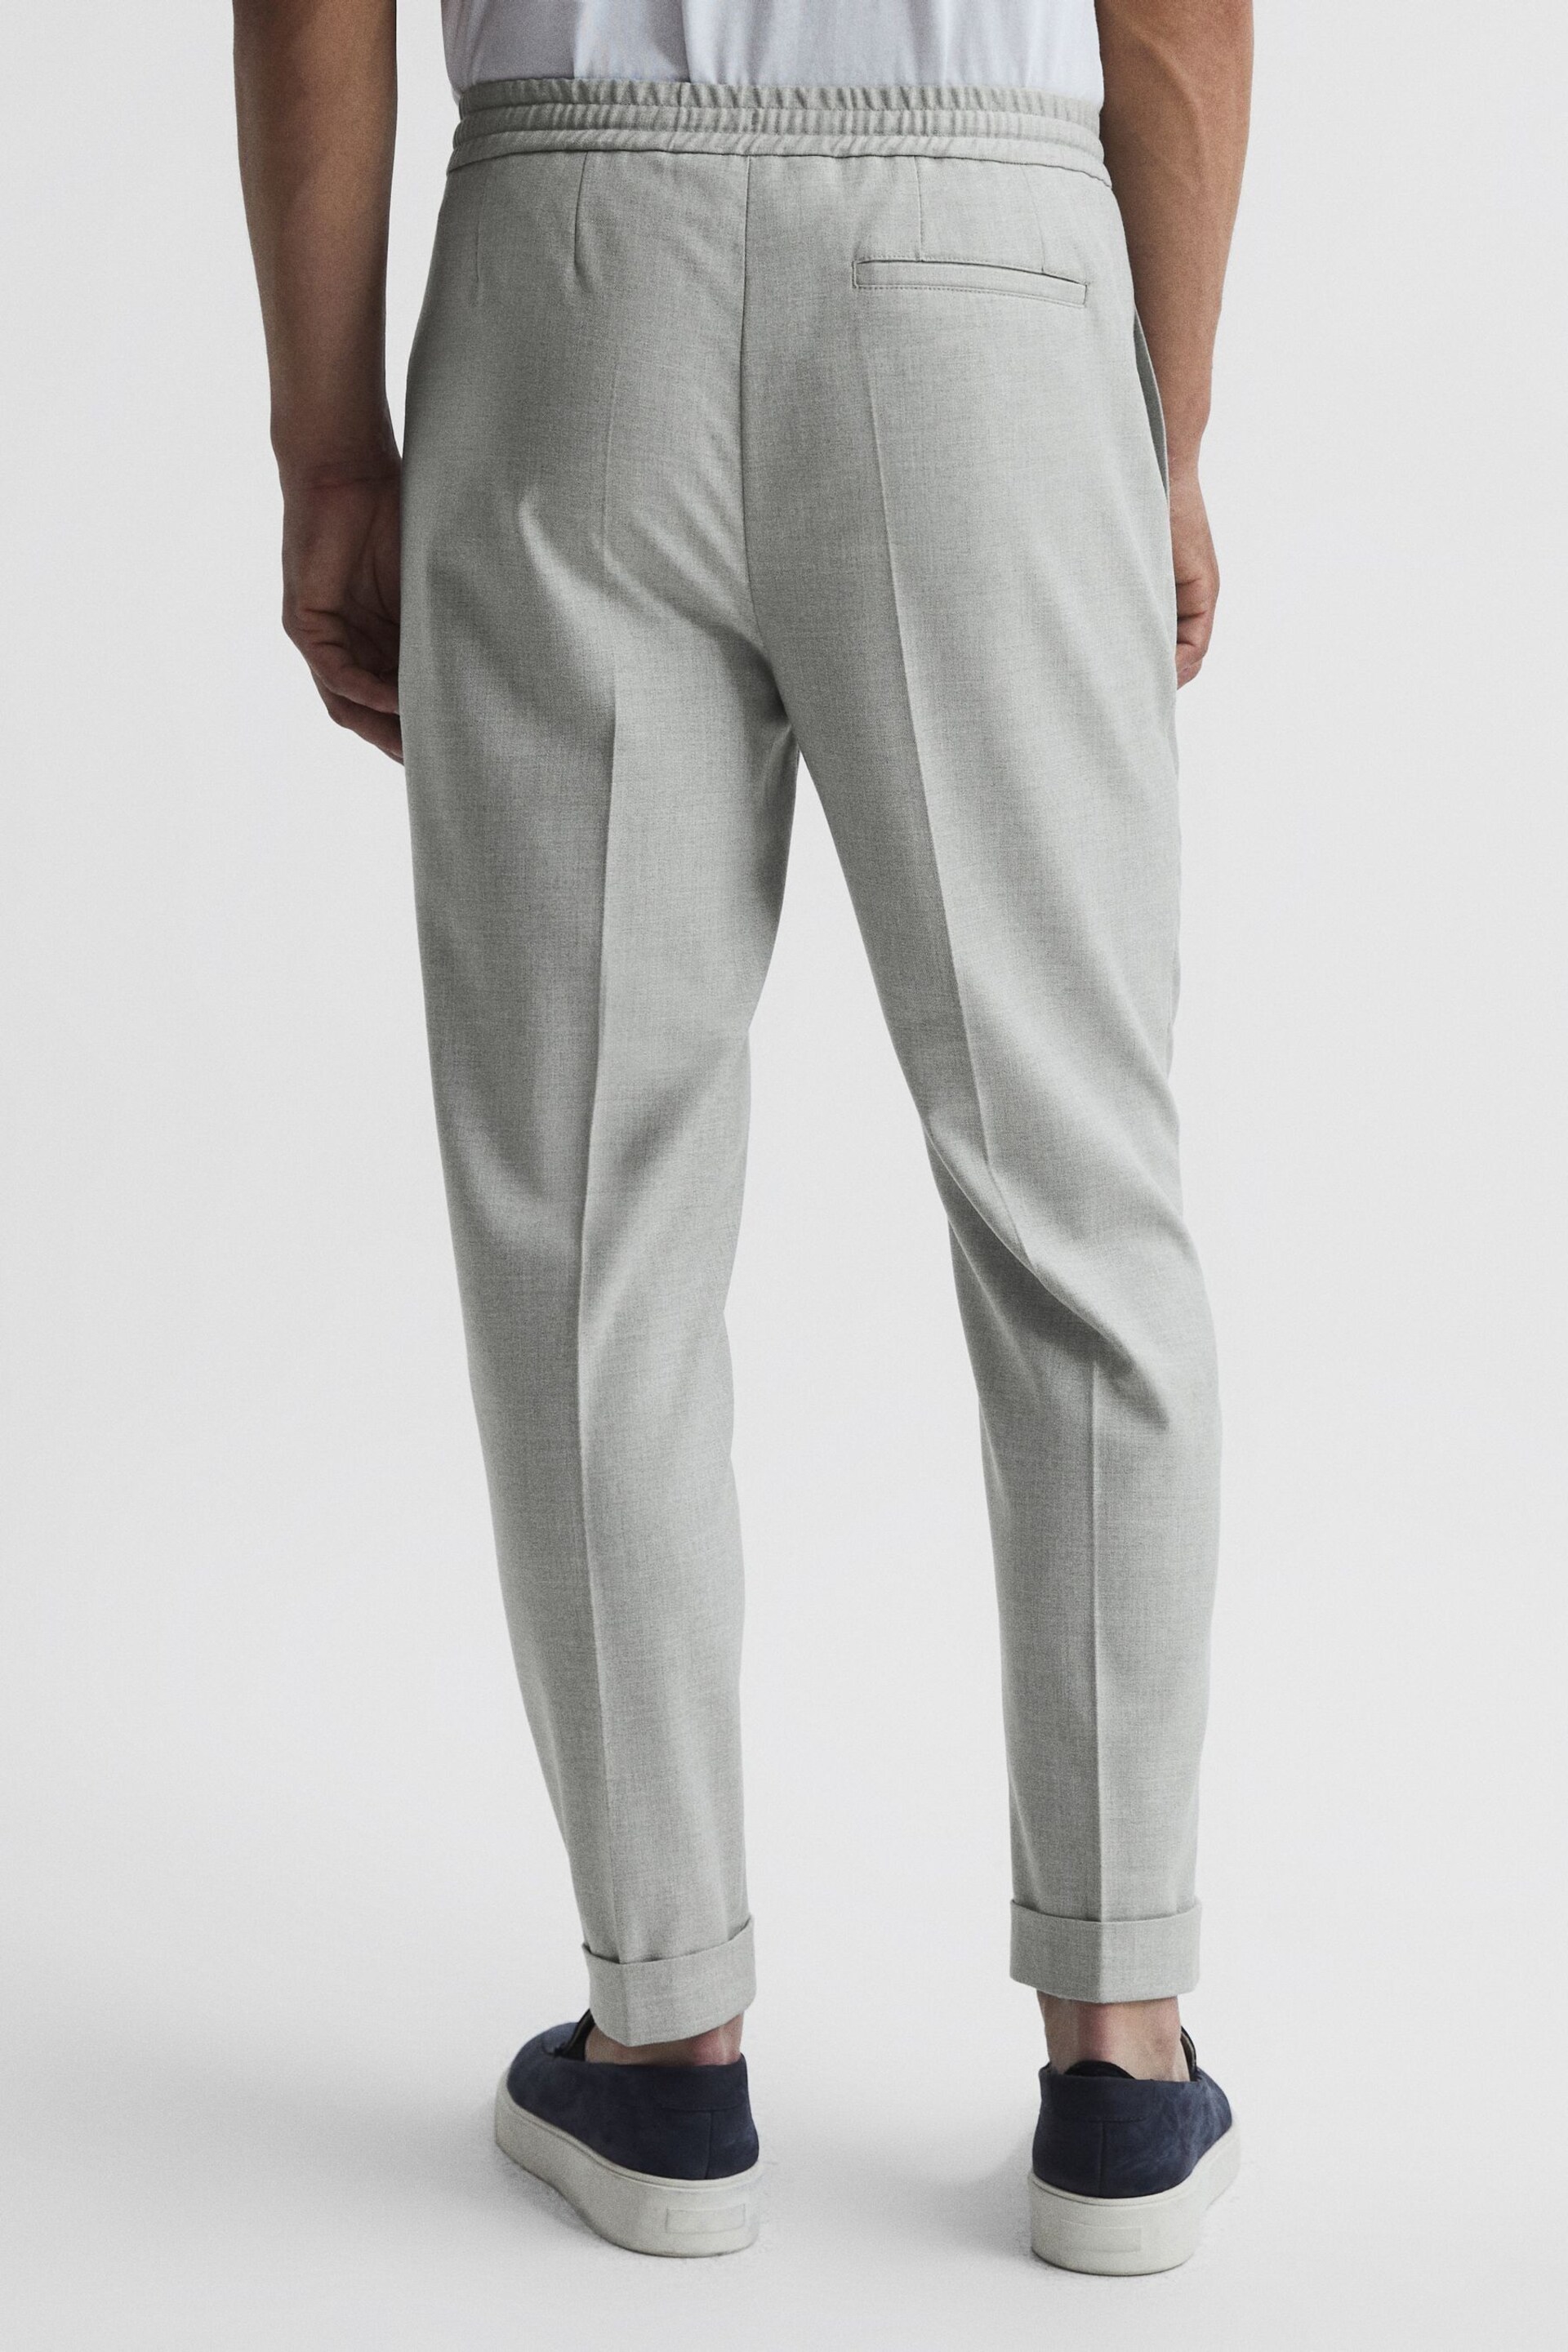 Reiss Soft Grey Brighton Relaxed Drawstring Trousers with Turn-Ups - Image 5 of 5